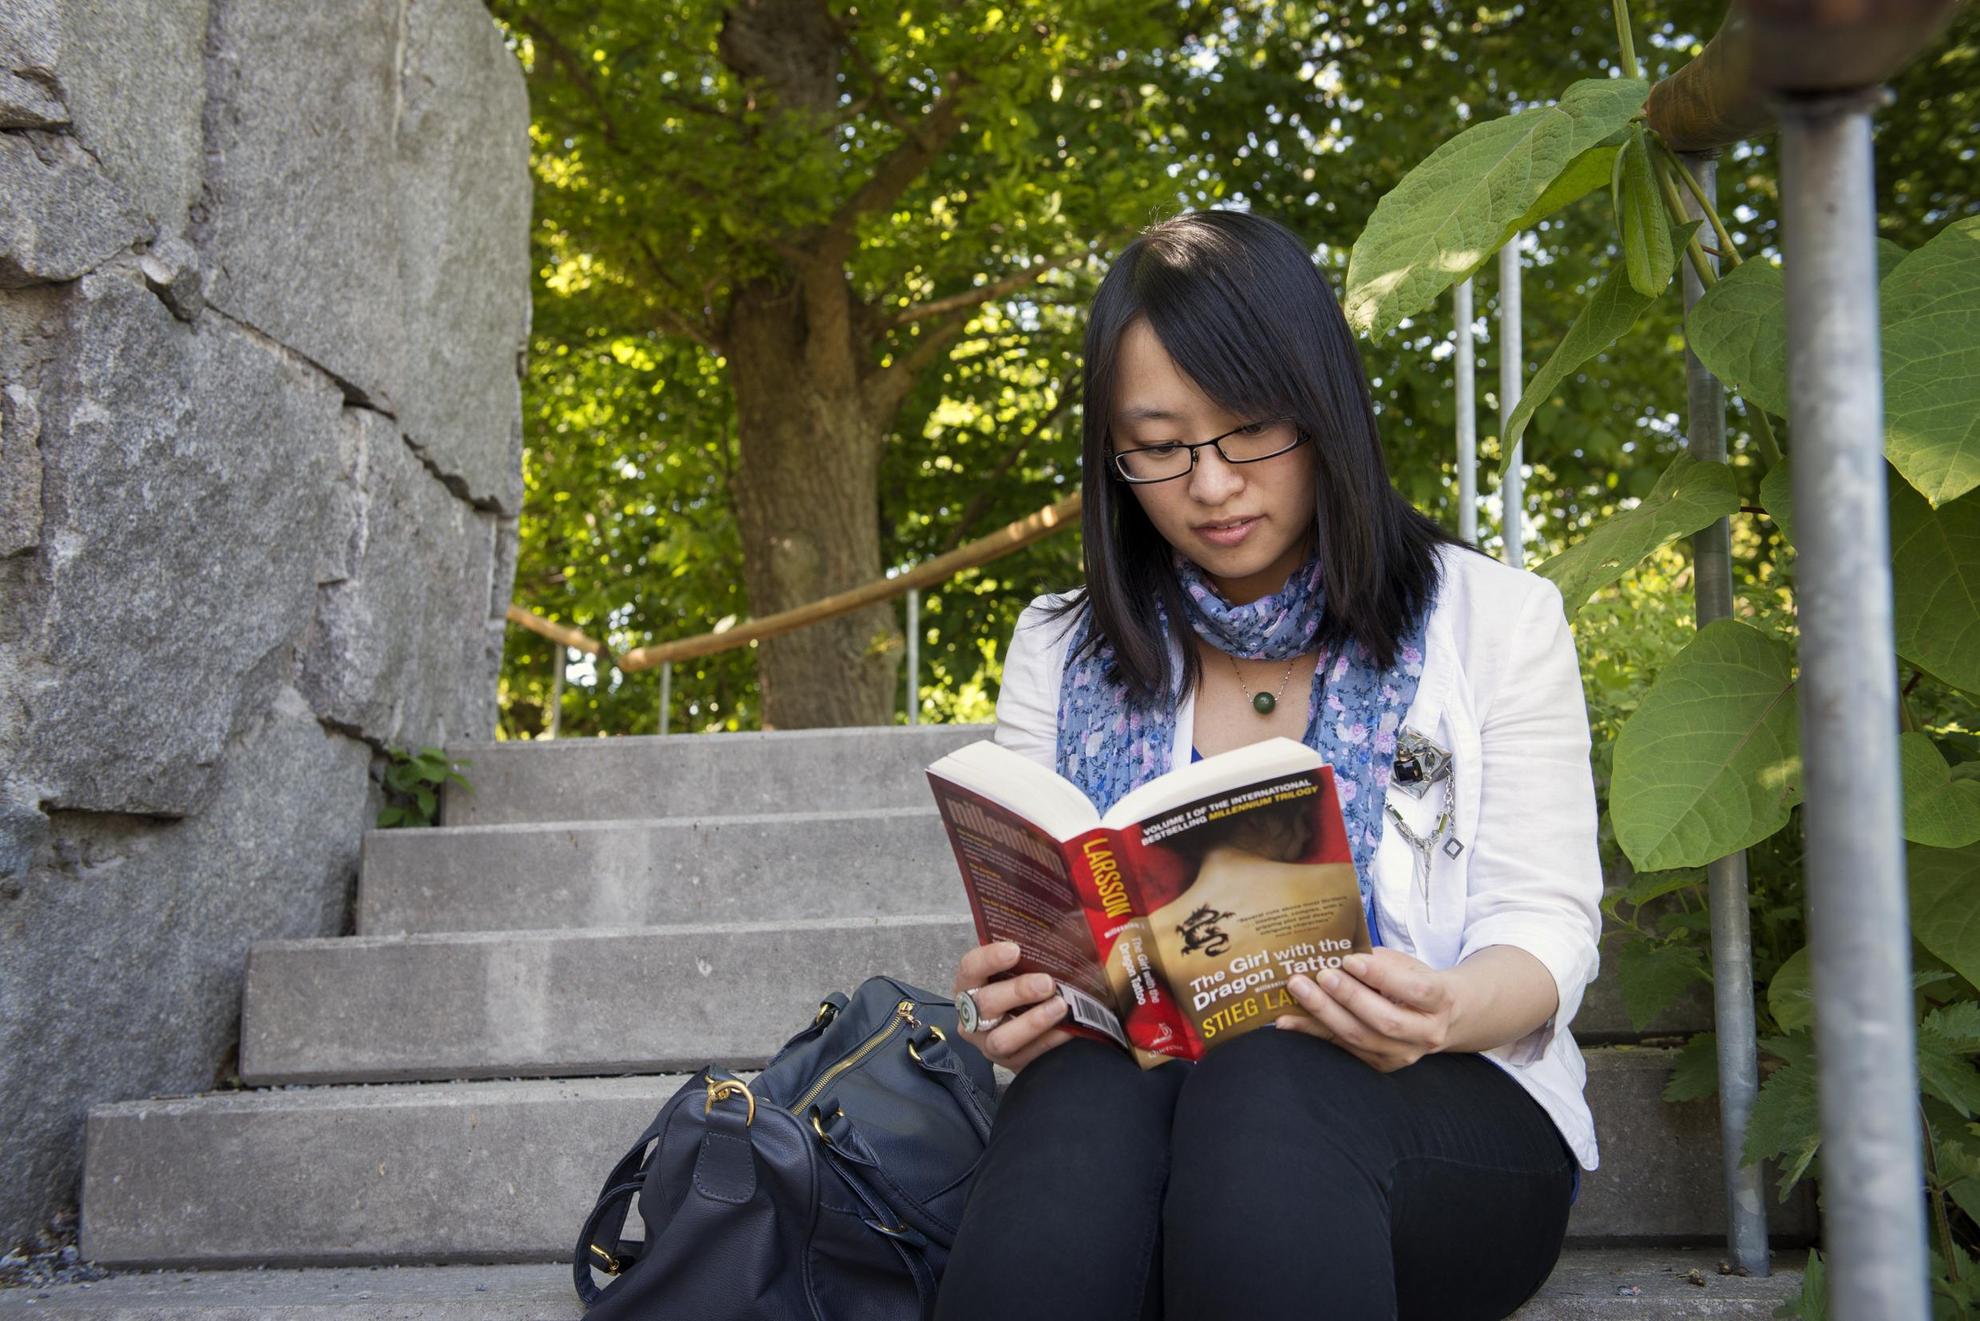 A woman is sitting on stone steps outdoors, reading a Stieg Larsson book in English.